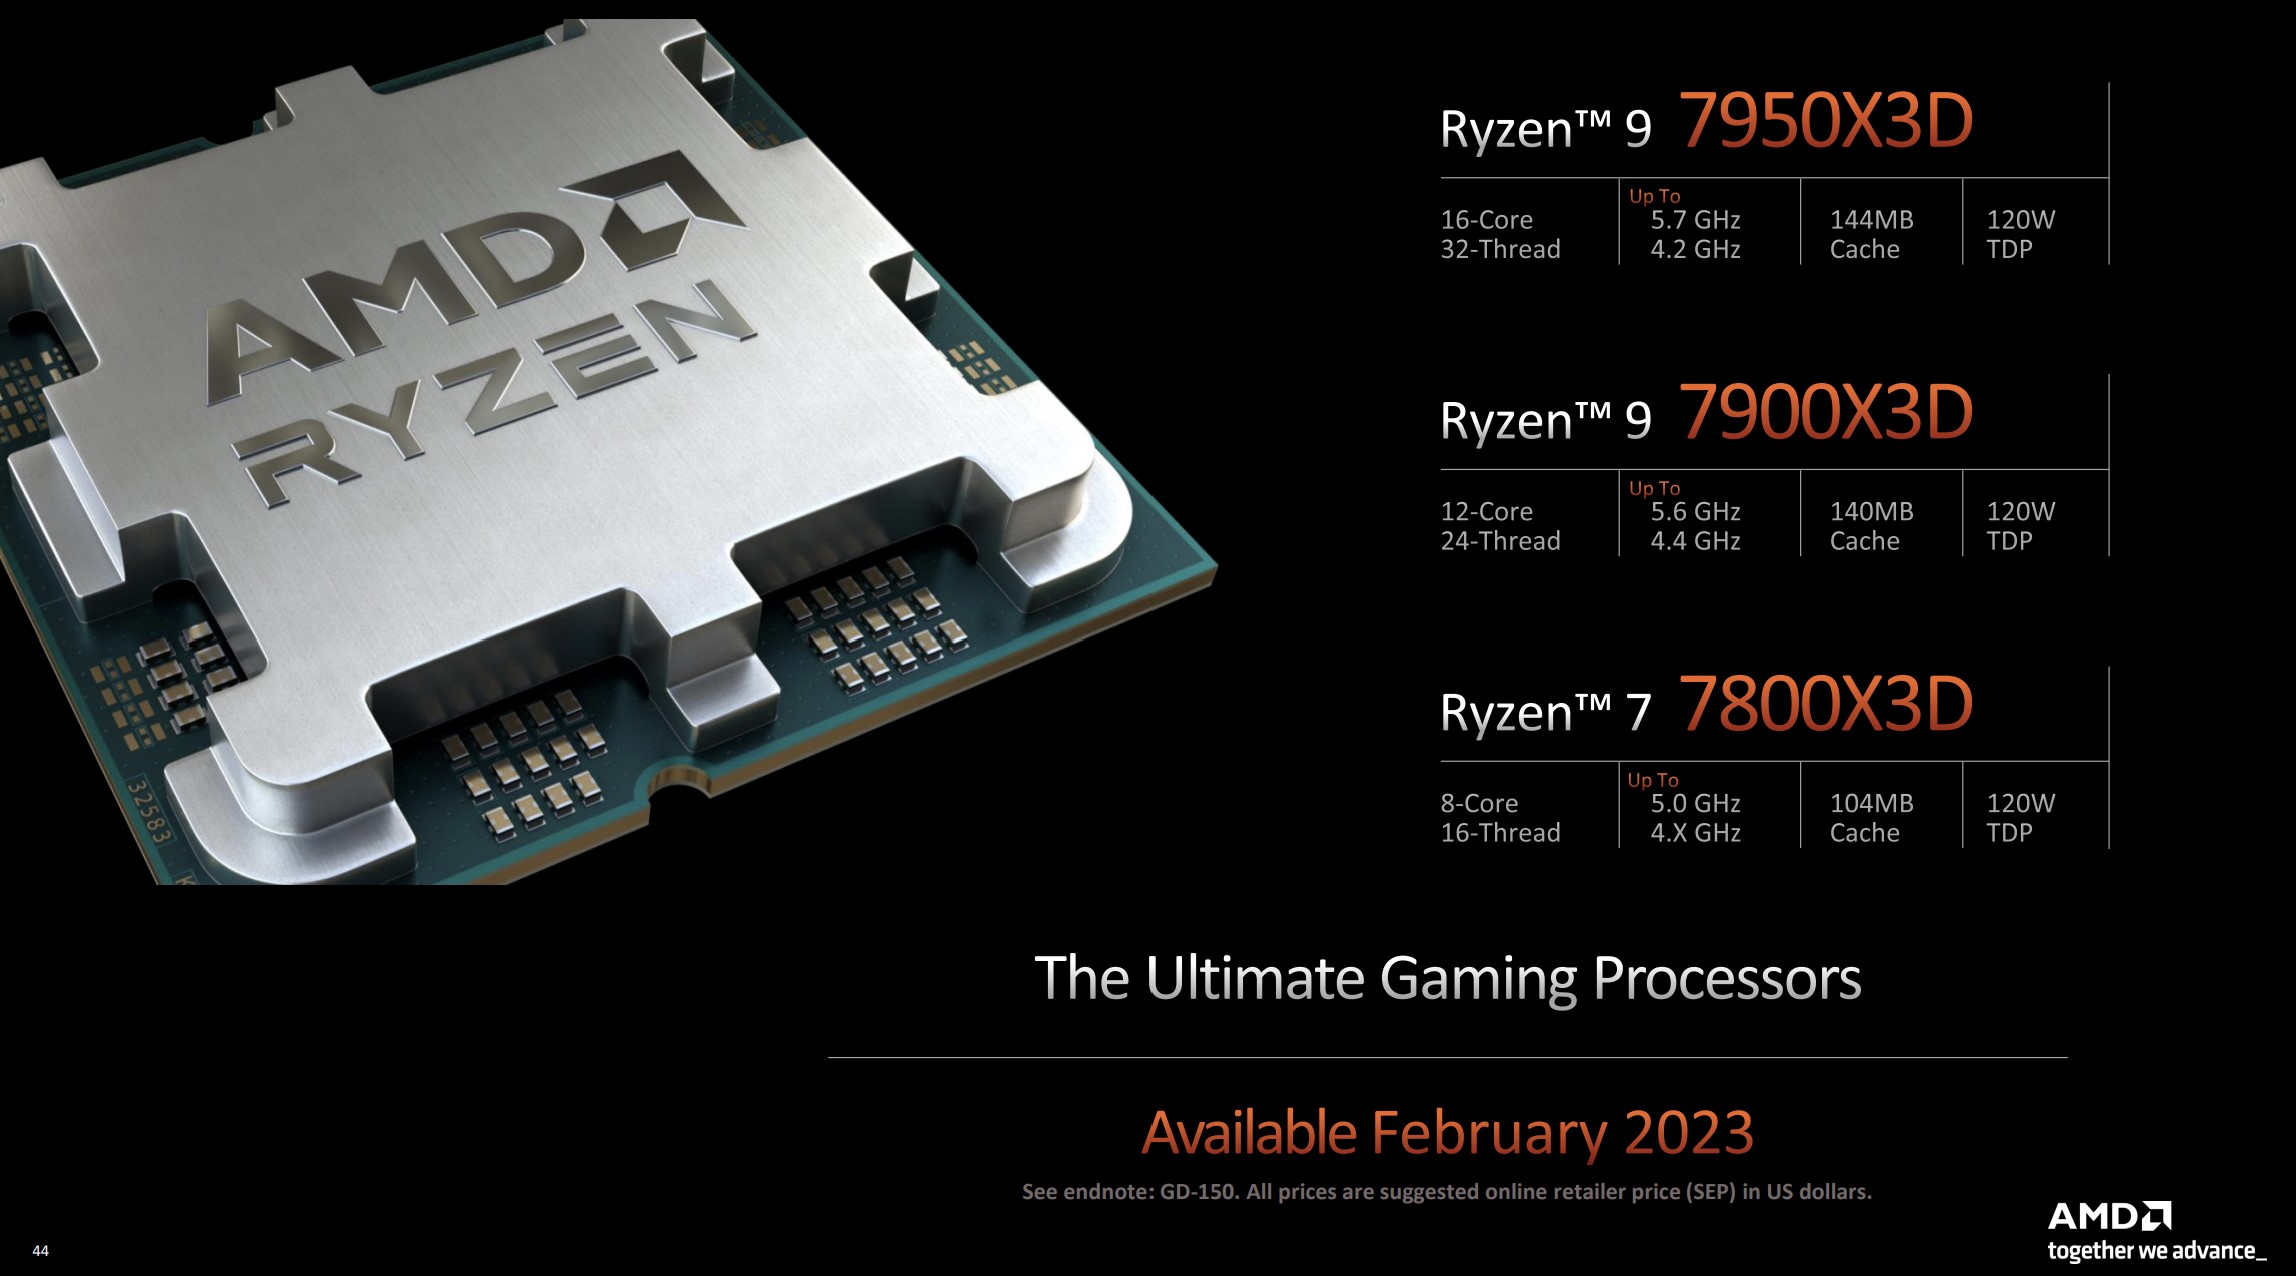 AMD's new Ryzen 9 7950X3D is up to 24% faster than Intel's best